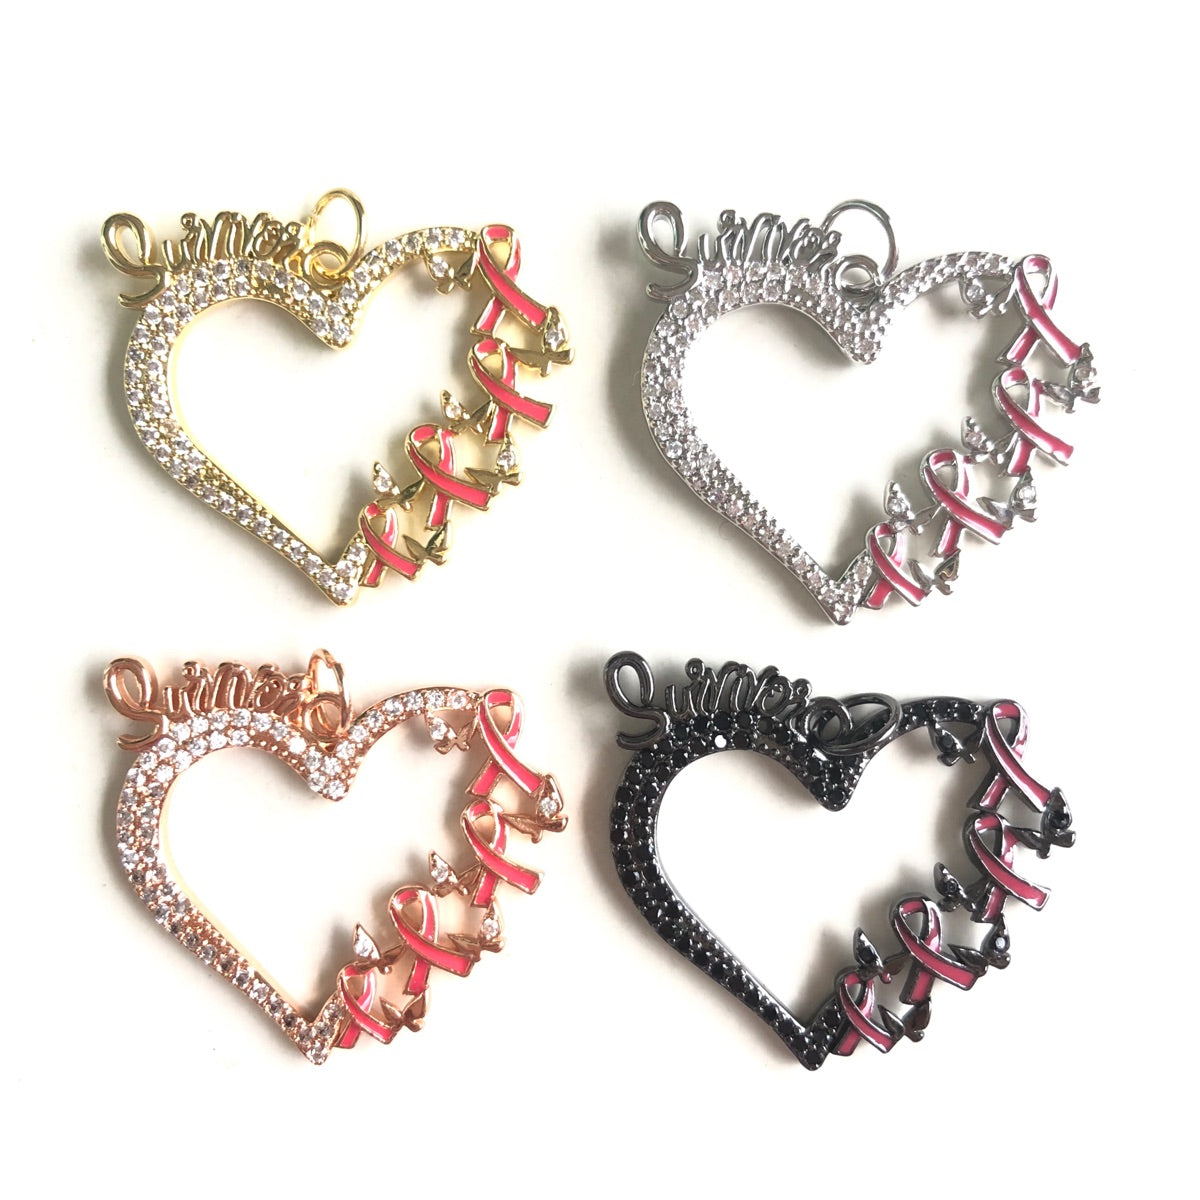 10pcs/lot CZ Pave Pink Ribbon Survivor Heart Charms - Breast Cancer Awareness CZ Paved Charms Breast Cancer Awareness New Charms Arrivals Charms Beads Beyond